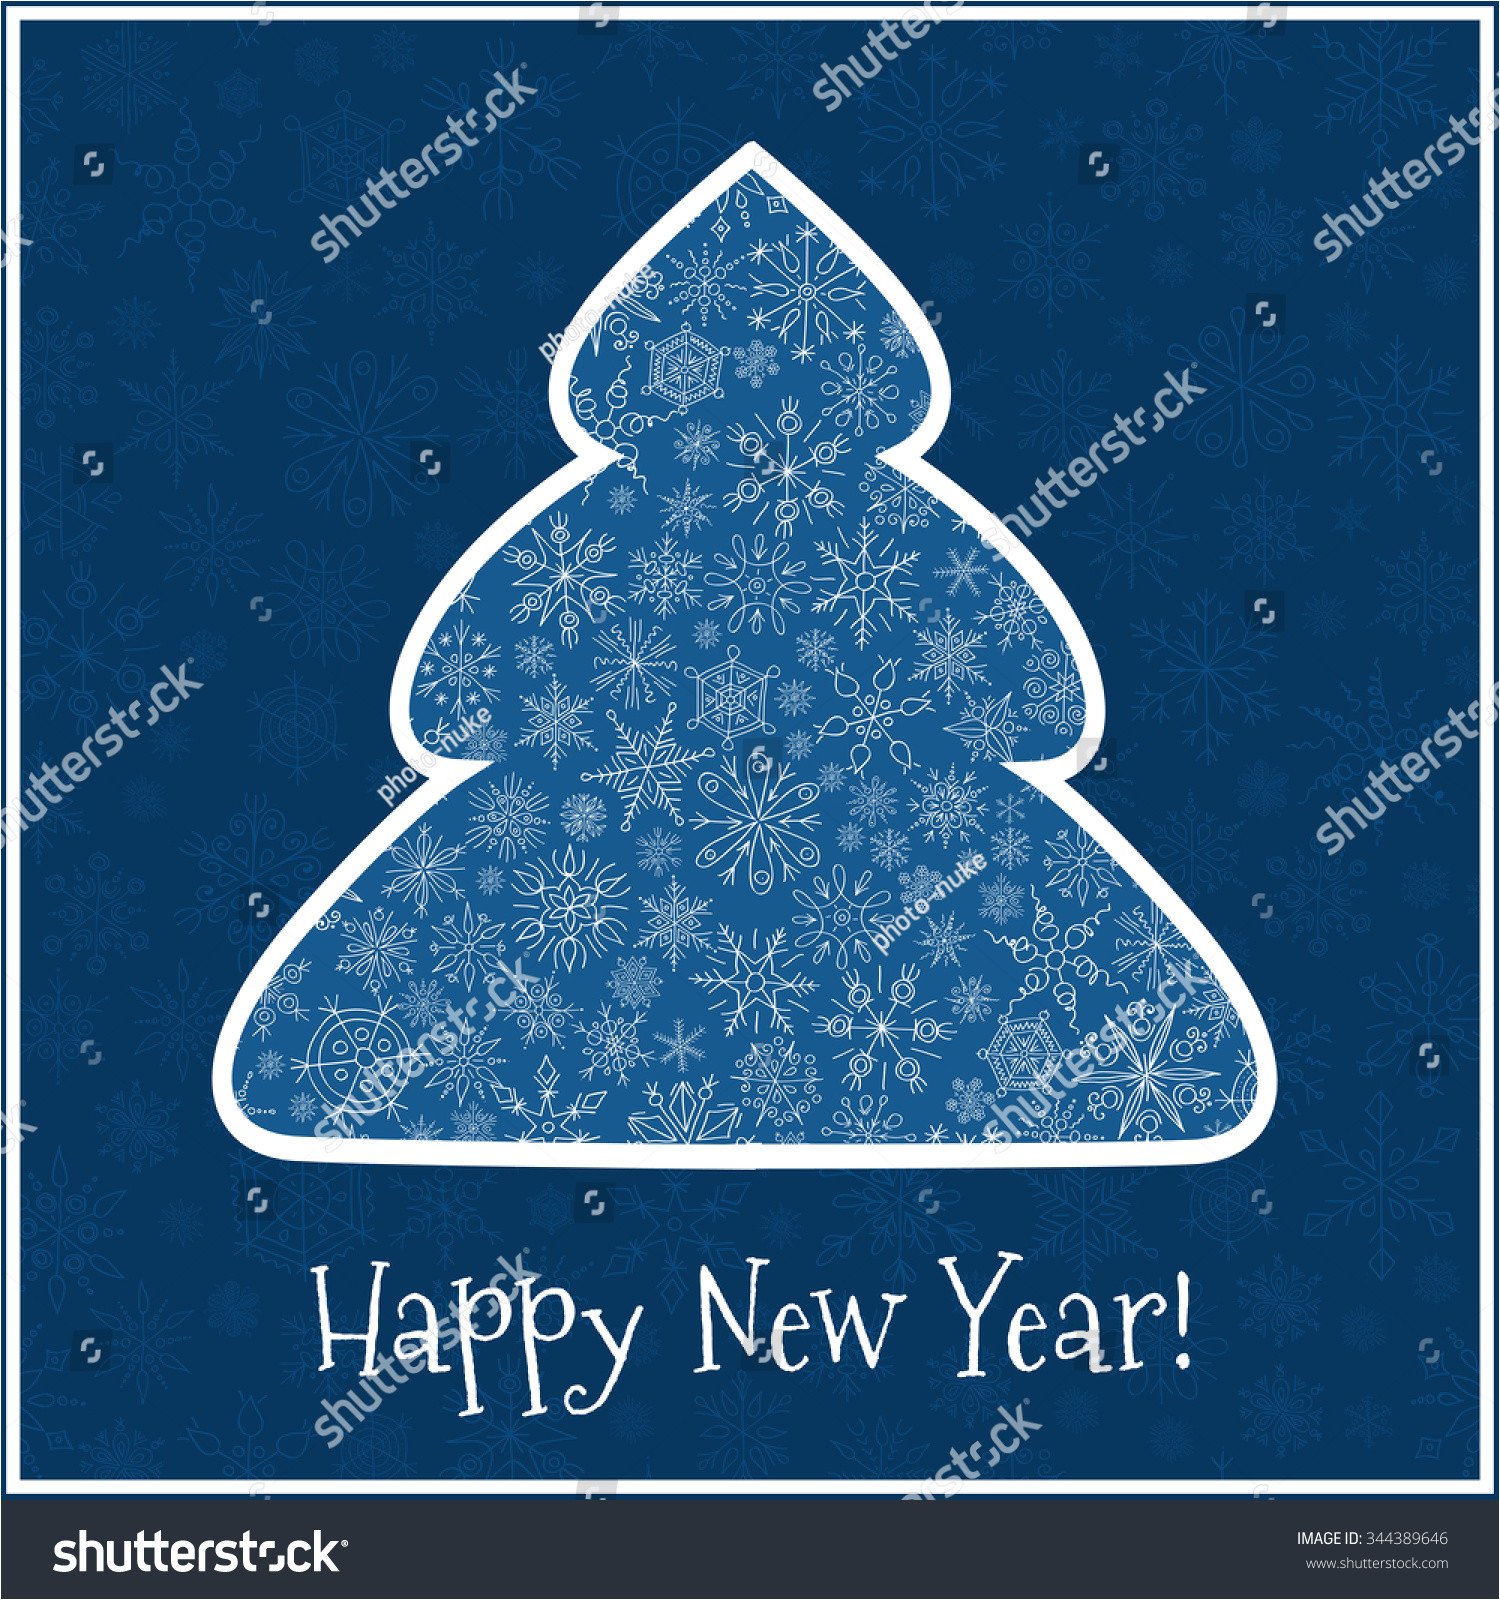 stock vector happy new year greeting card beautiful in retro style christmas tree from snowflakes illustration 344389646 jpg